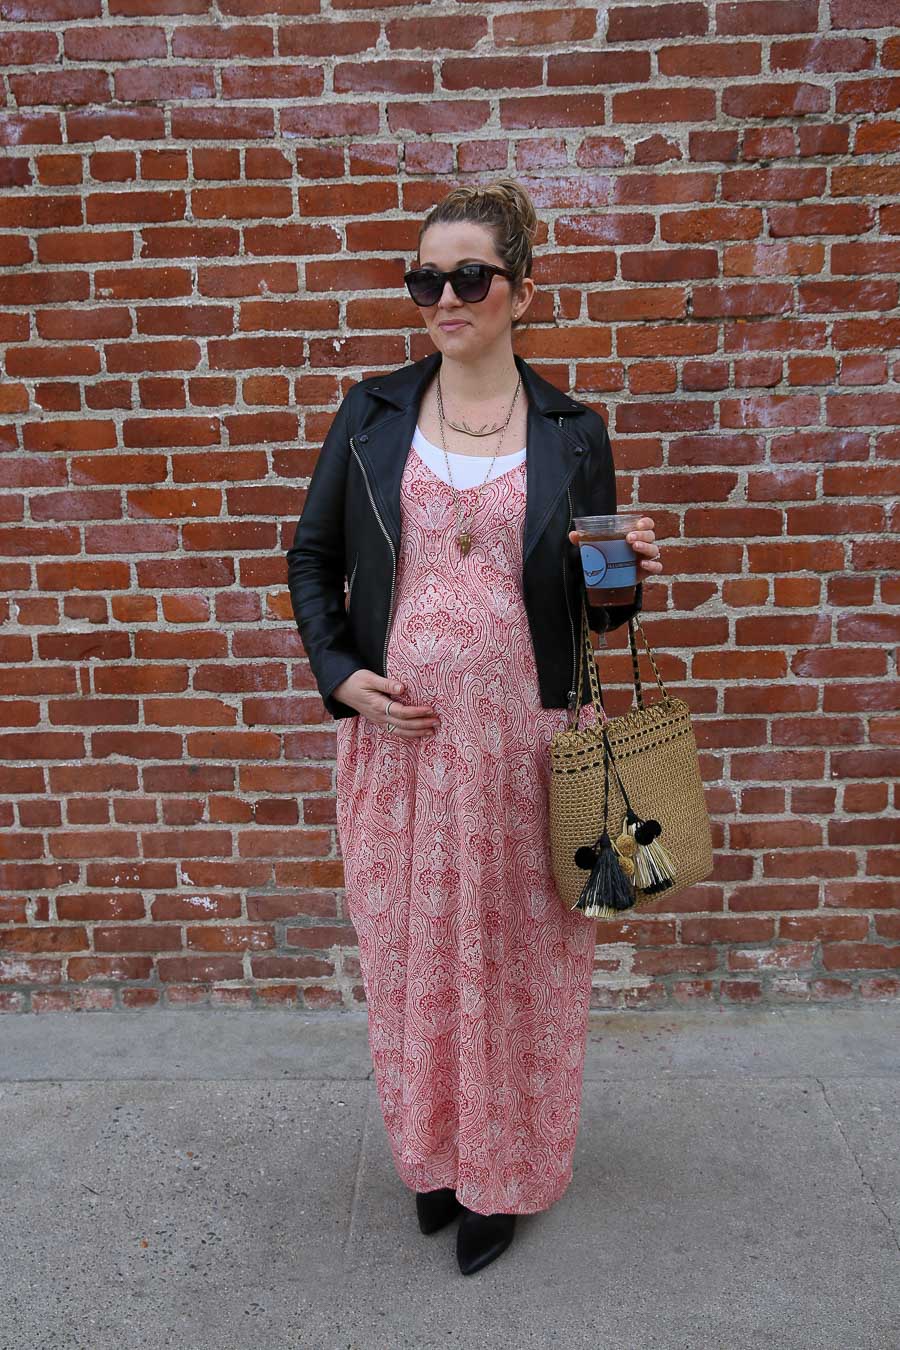 Cute Pregnancy Outfit - Maxi Dress and Leather Jacket